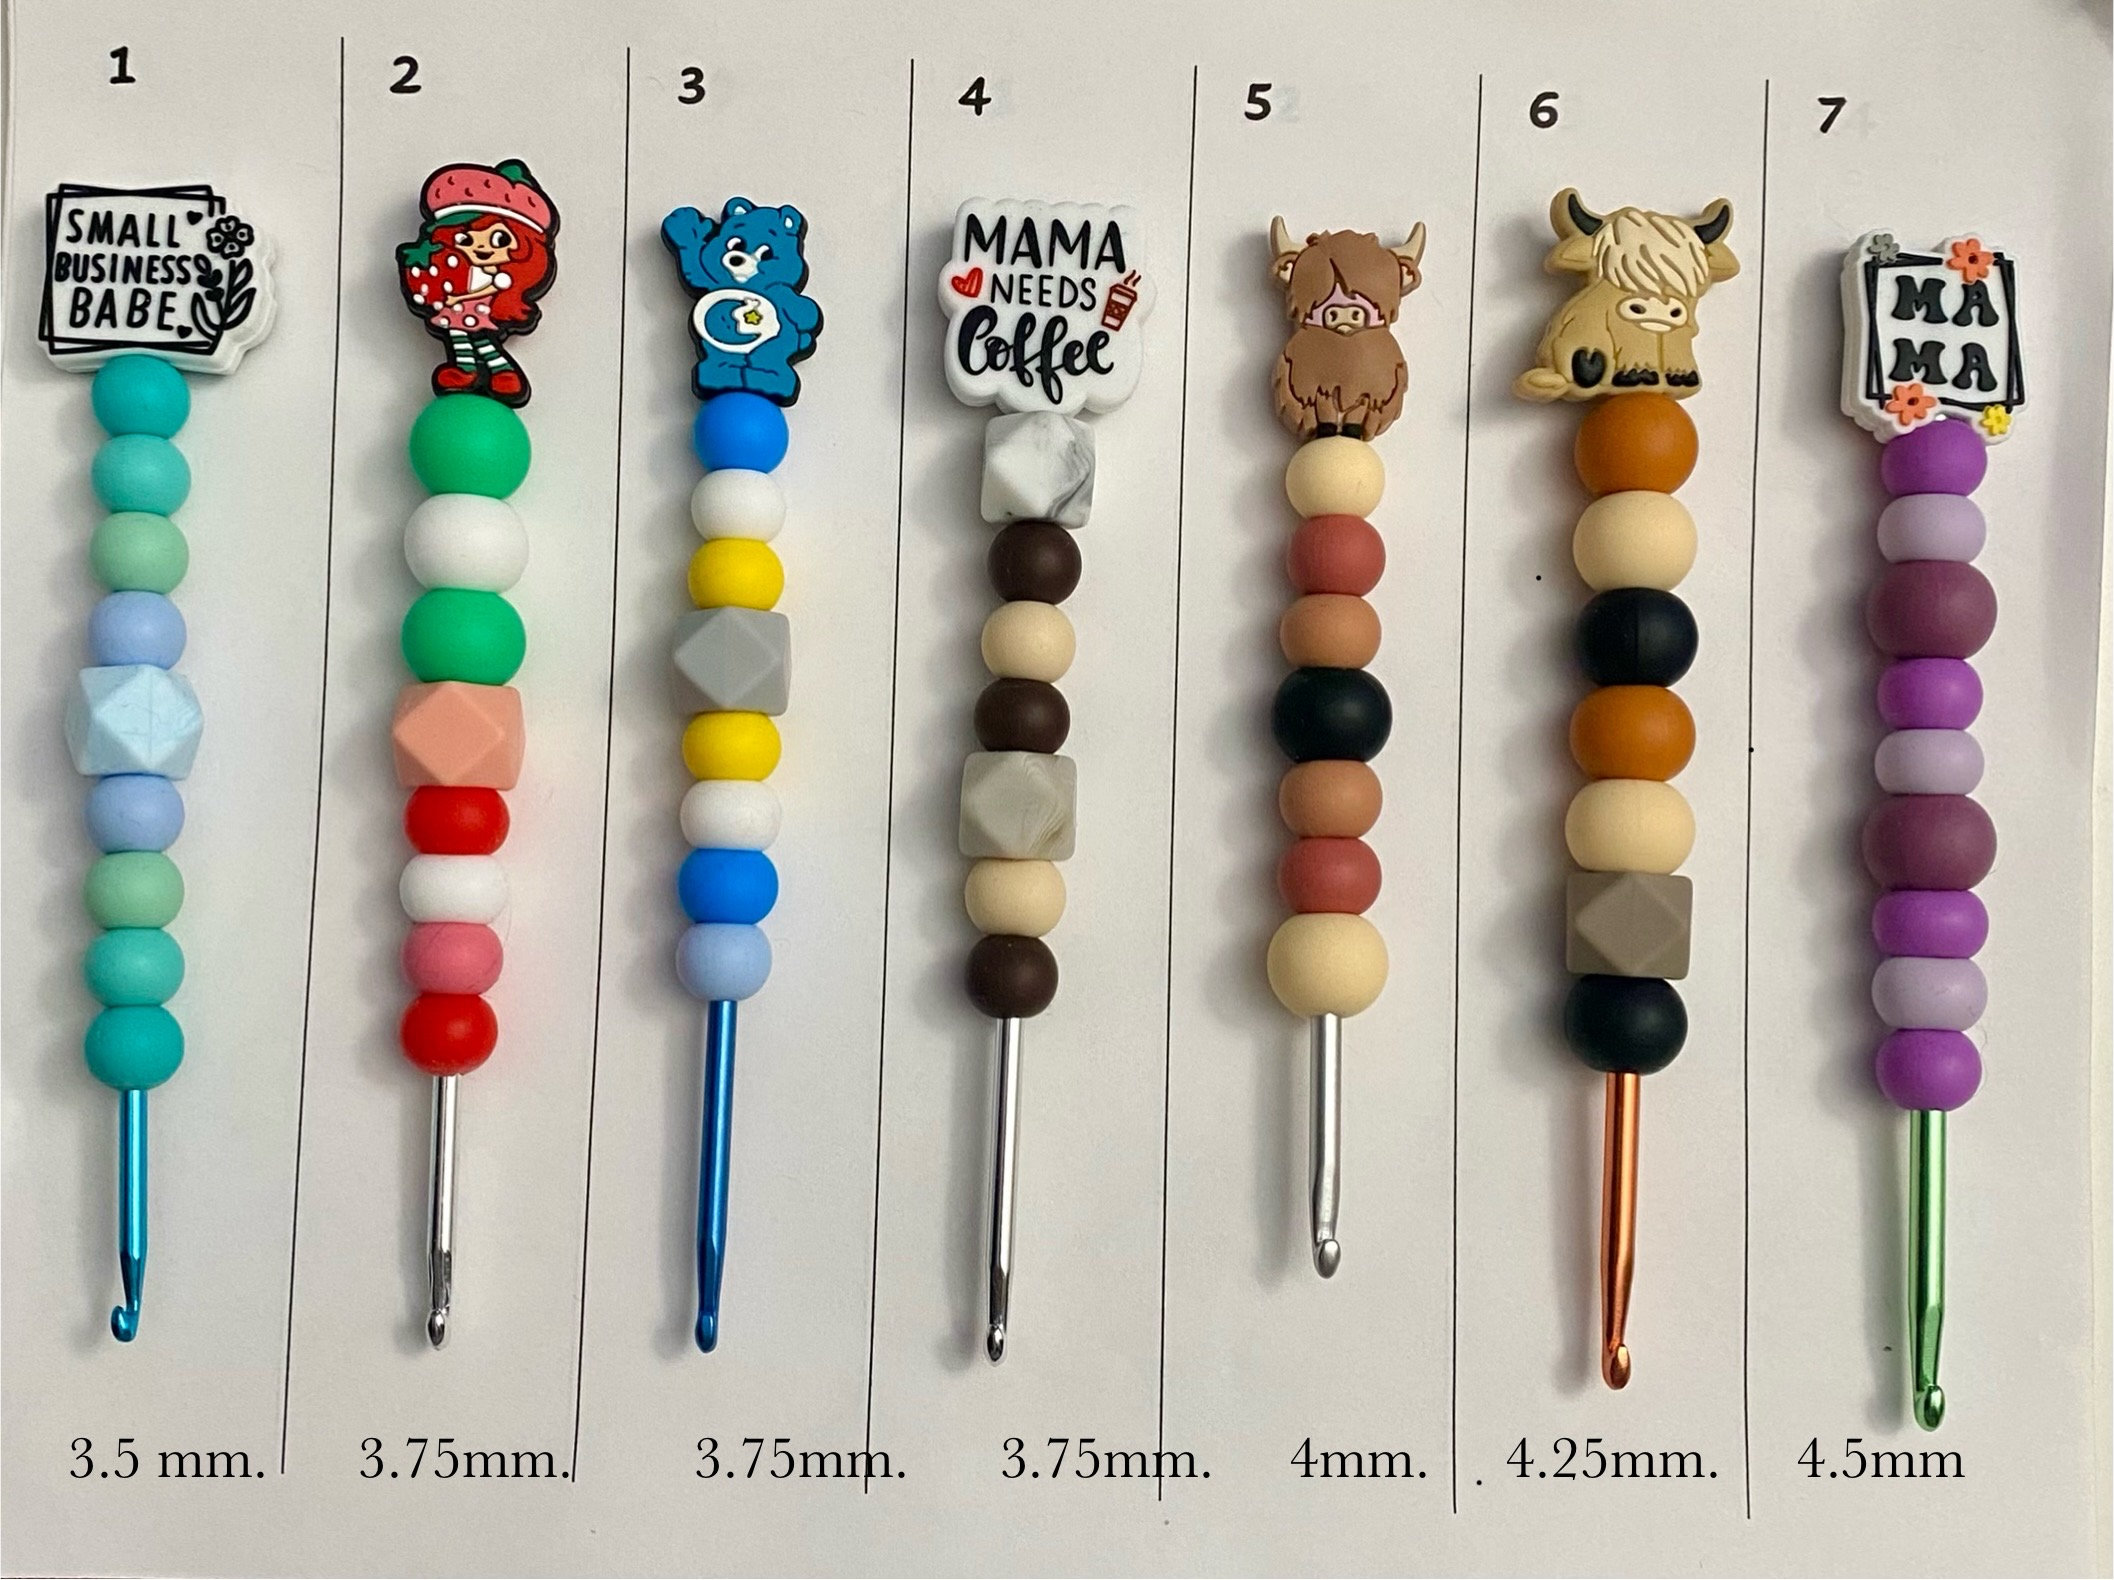 DIY Bead Kit, Beaded Pen Kits, Bead Kits for Kids, Bead Kit DIY, Springtime  Gifts, Holiday Gnomes, Silicone Beads For Pens